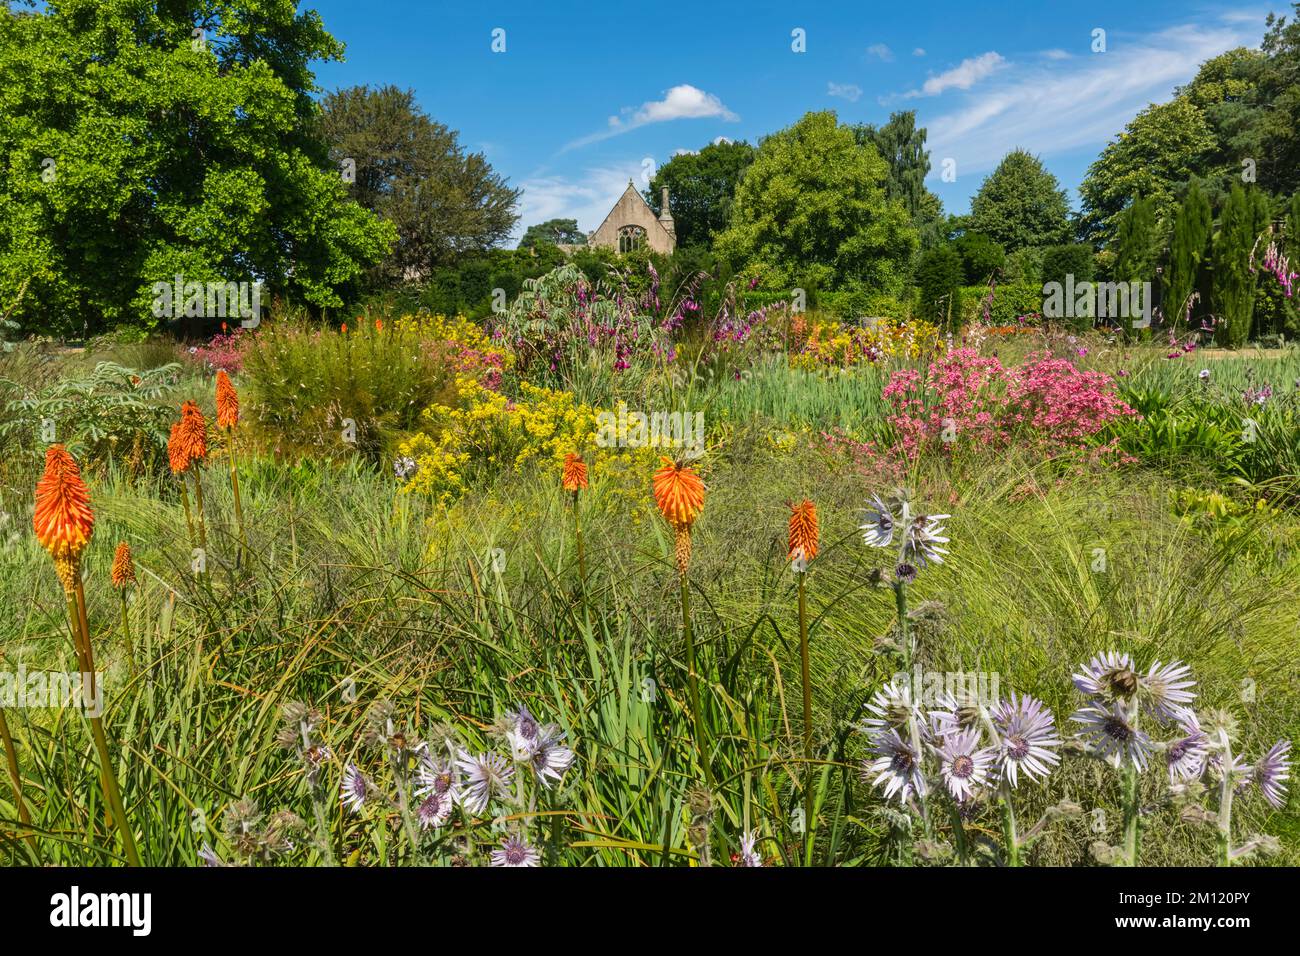 England, West Sussex, Haywards Heath, Handcross, Nymans House and Garden Stock Photo